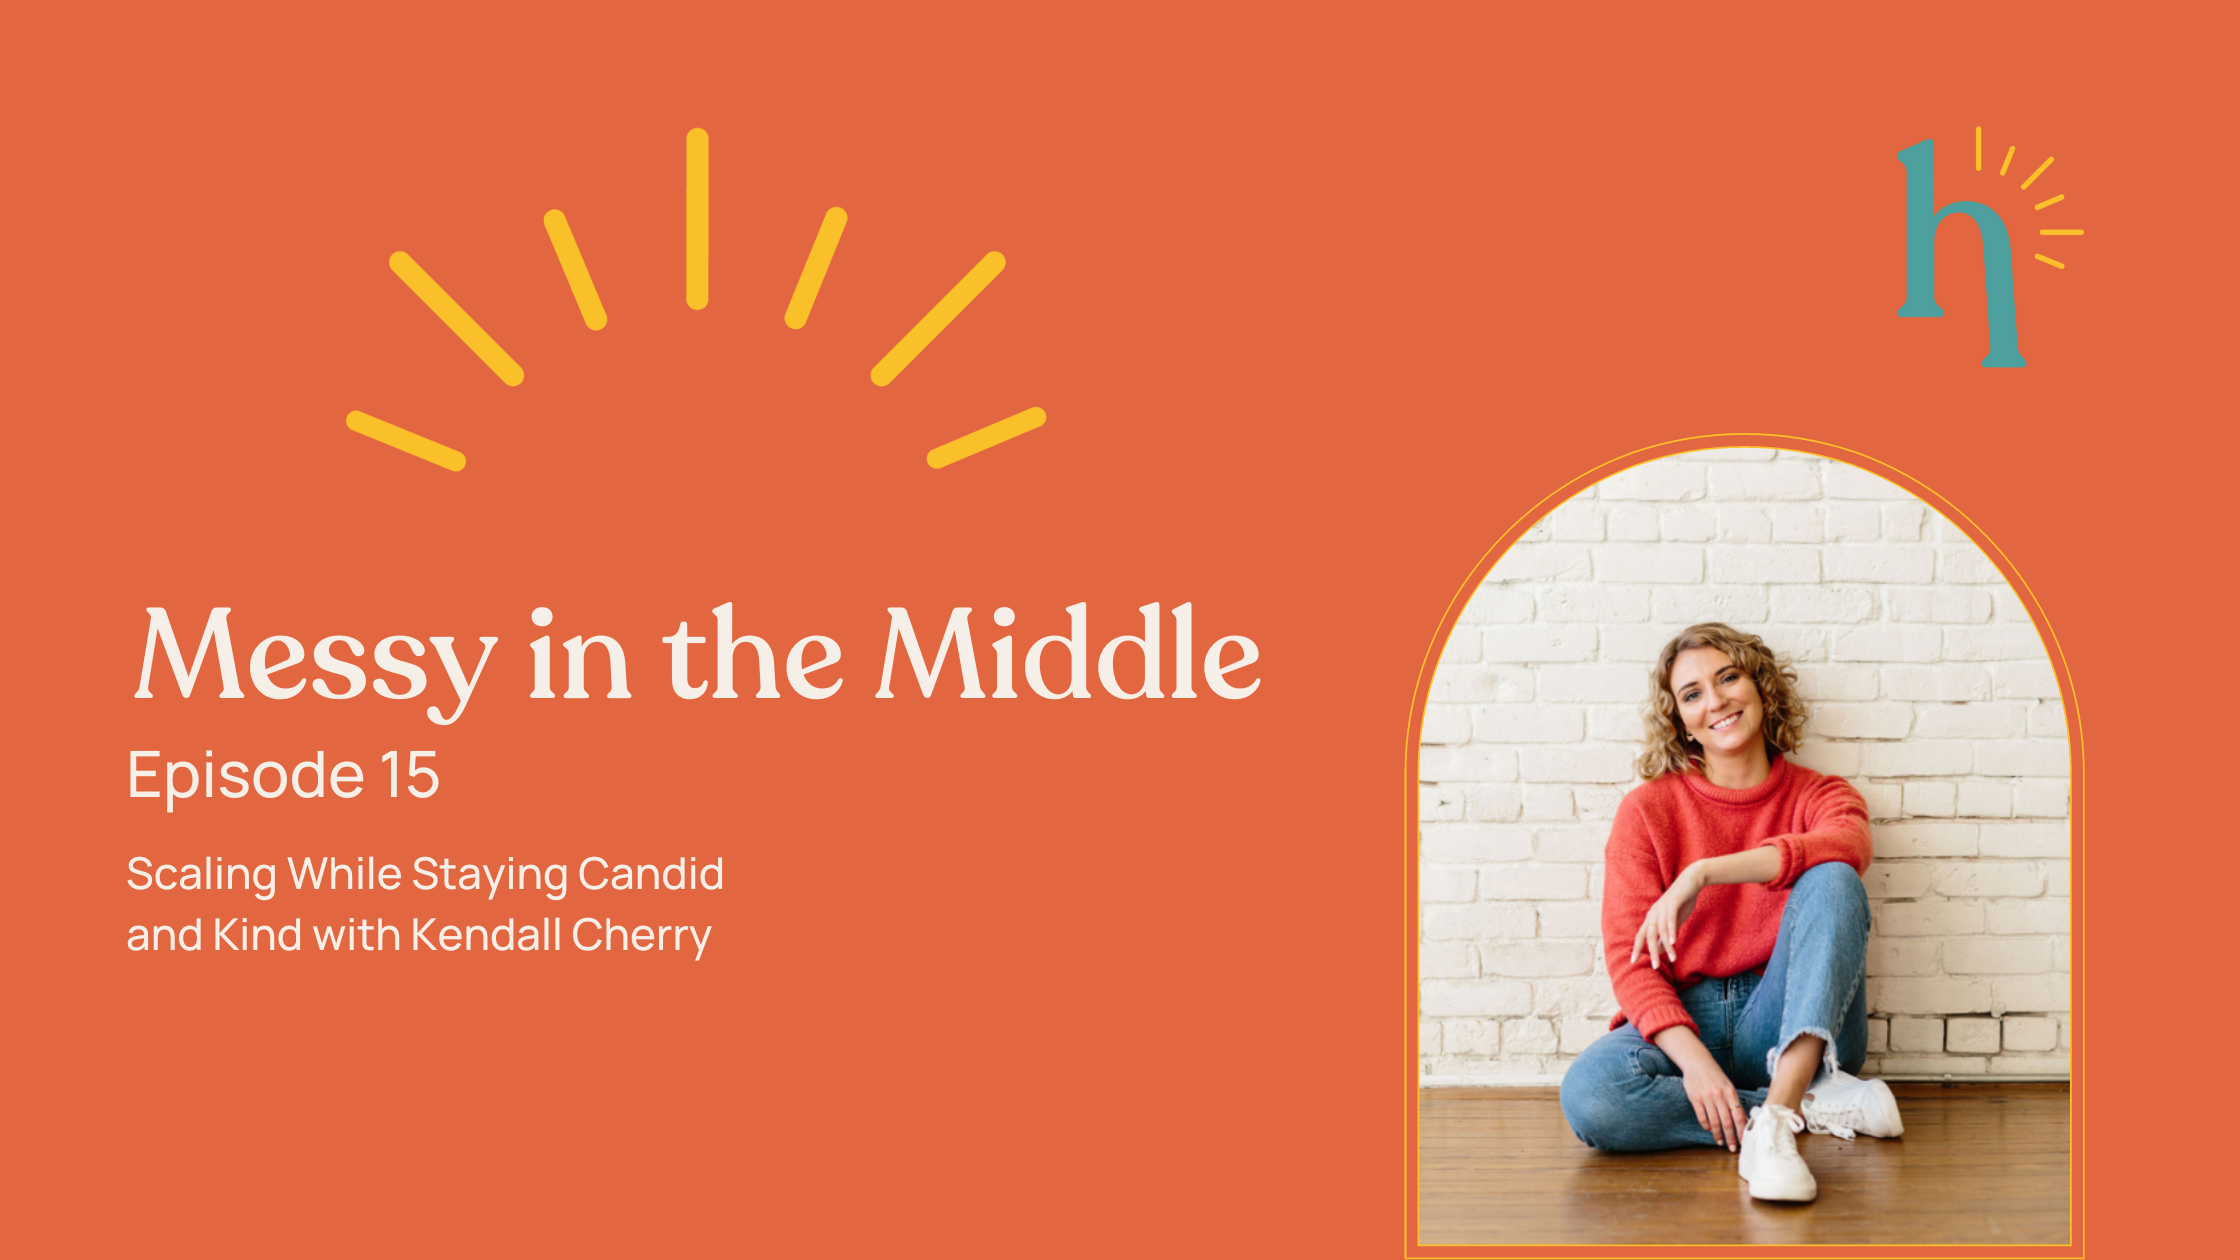 Scaling While Staying Candid and Kind with Kendall Cherry